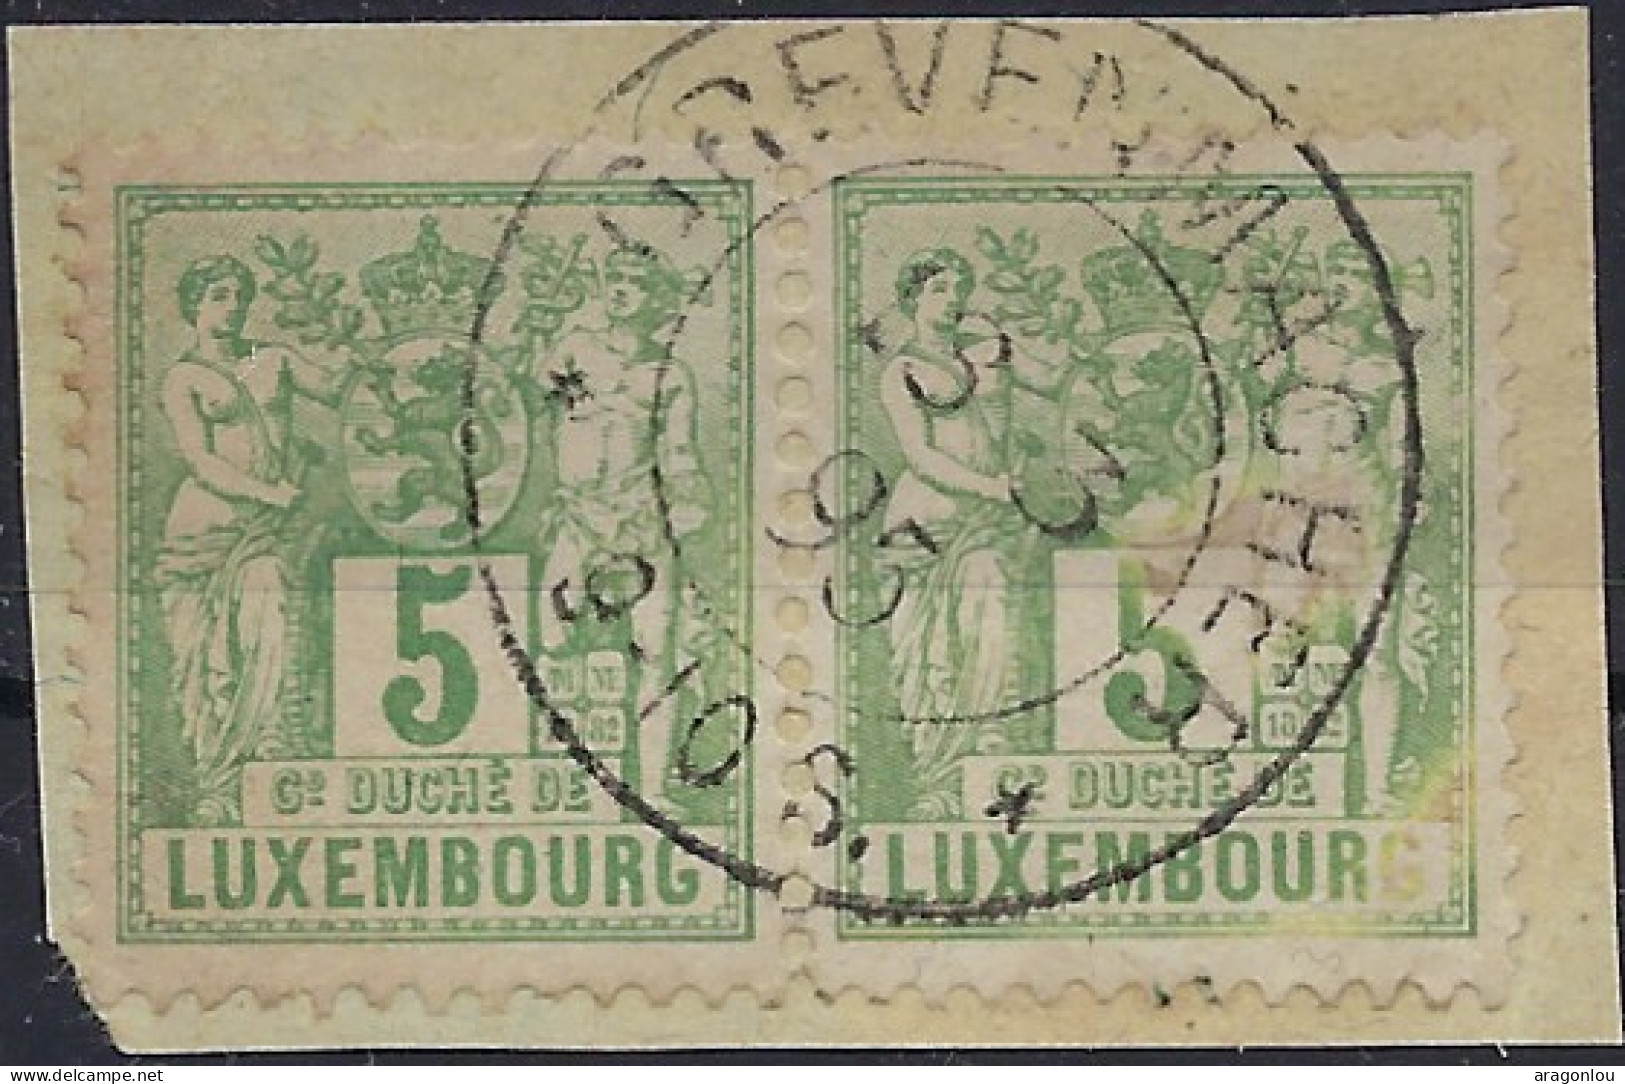 Luxembourg - Luxemburg - Timbres - Taxes  -  Timbres Paire   Cachet Sur Papier - Strafport